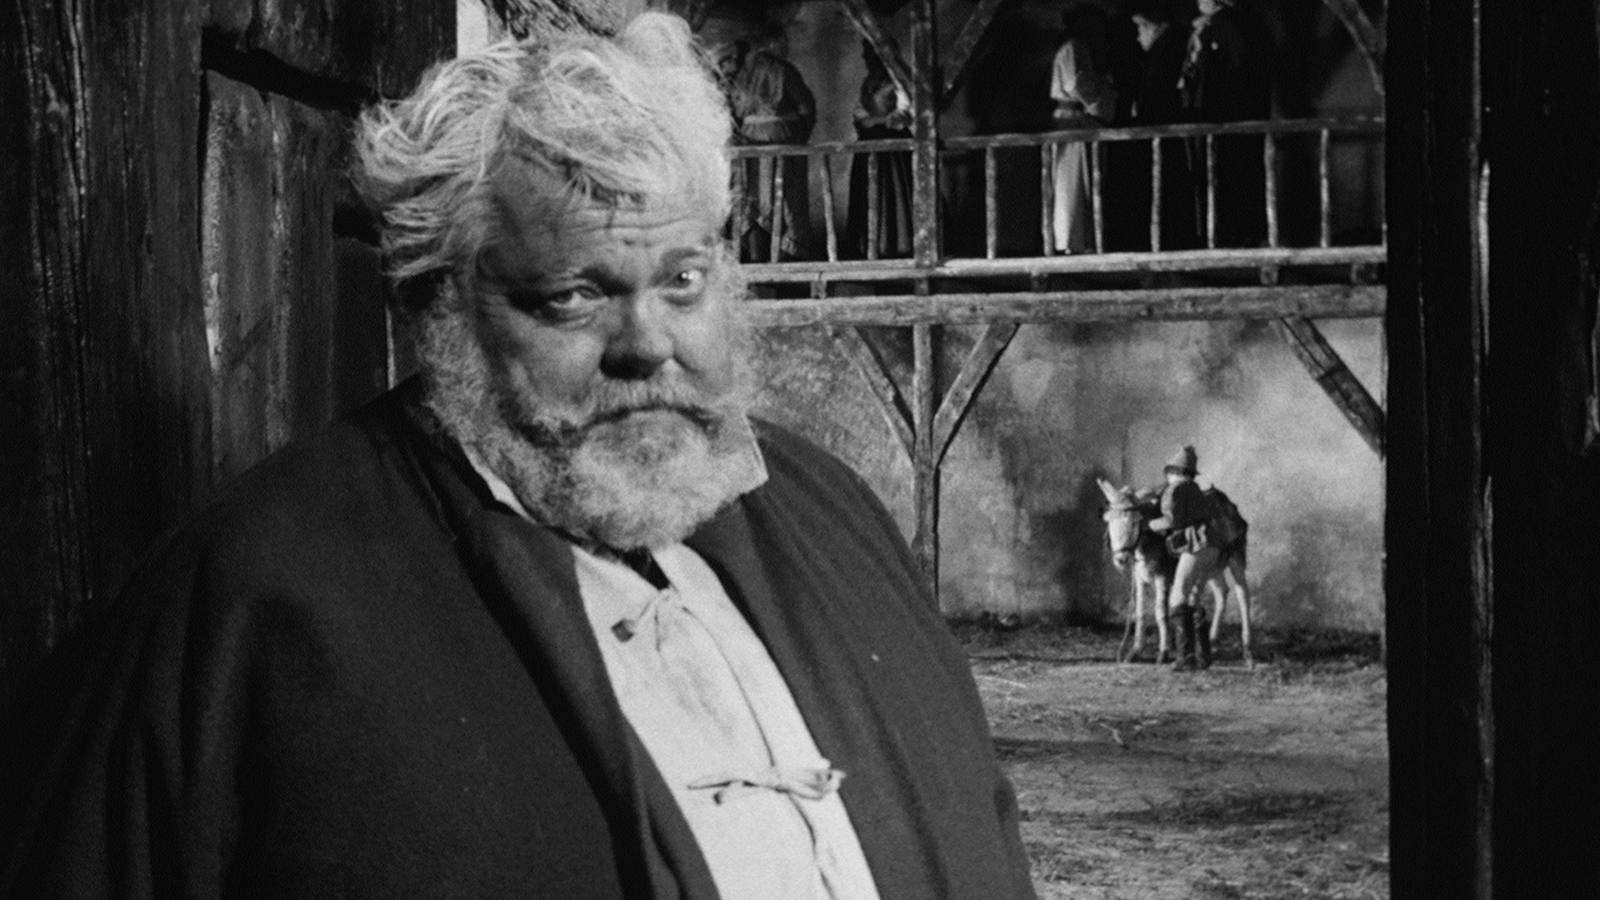 Videophiled Masters: Orson Welles’ ‘Chimes at Midnight’ and ‘The Immortal Story’ debut on disc